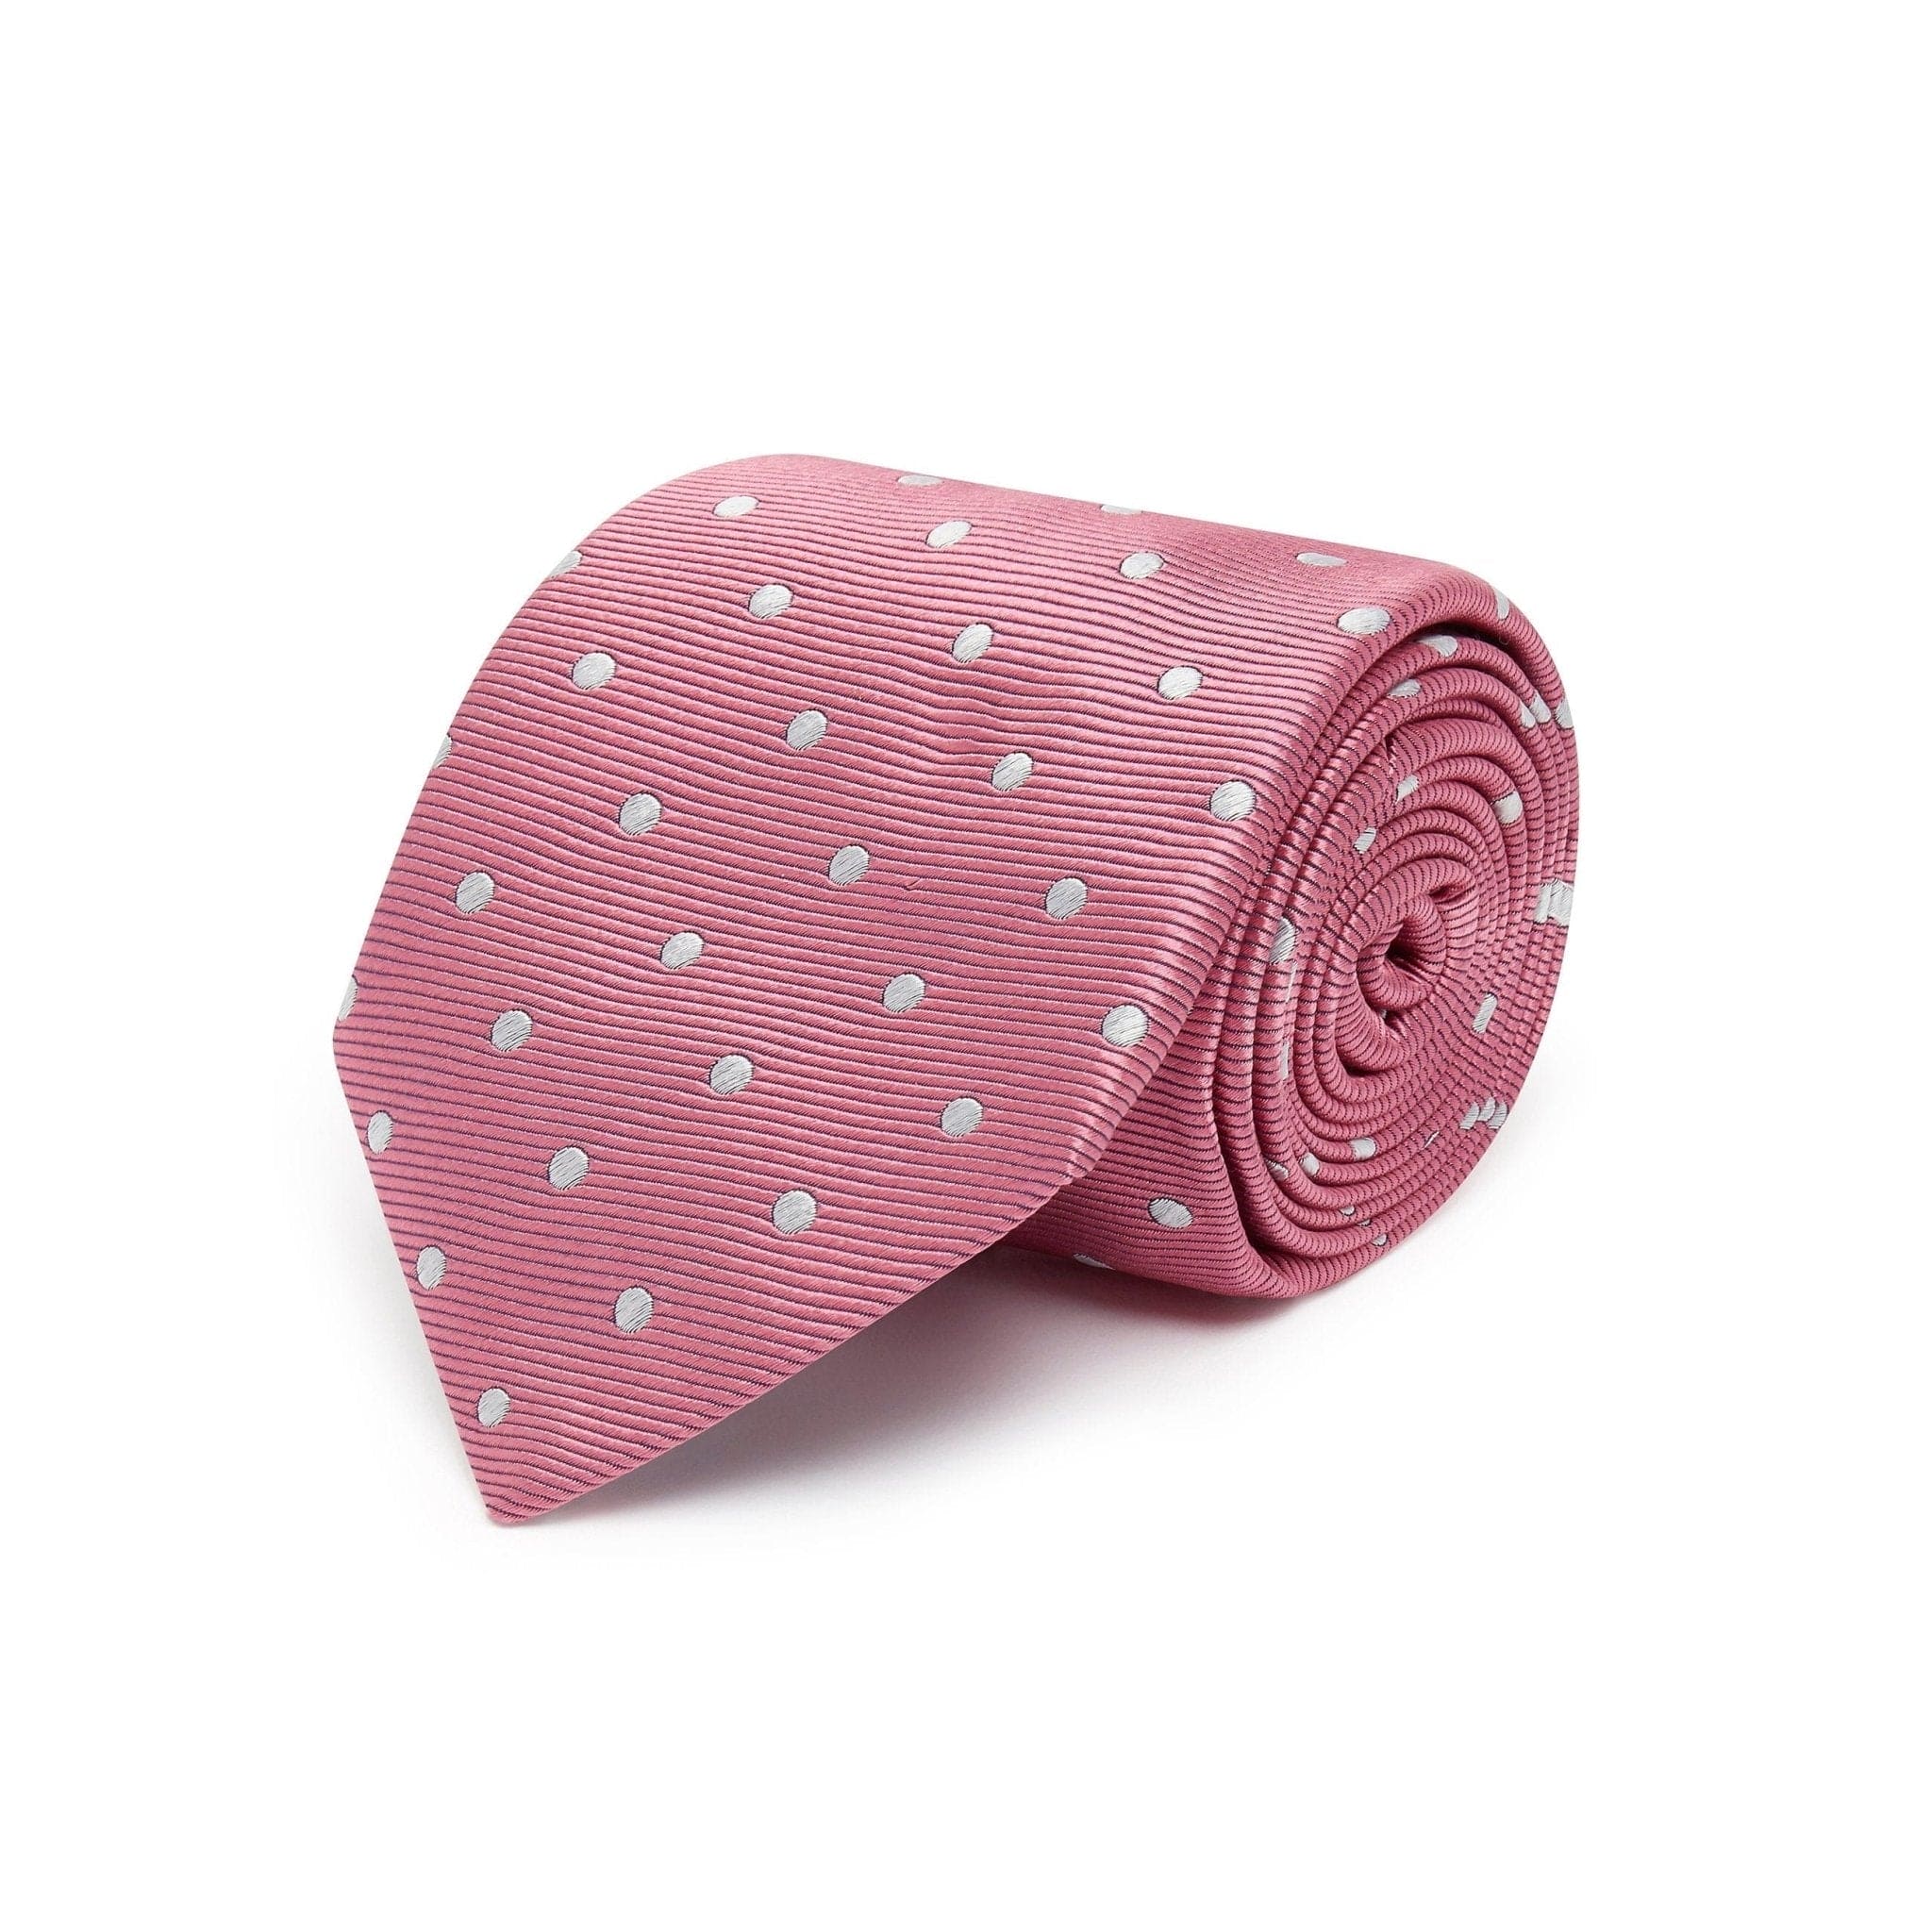 Baby Pink Twill with White Spots Woven Silk Tie